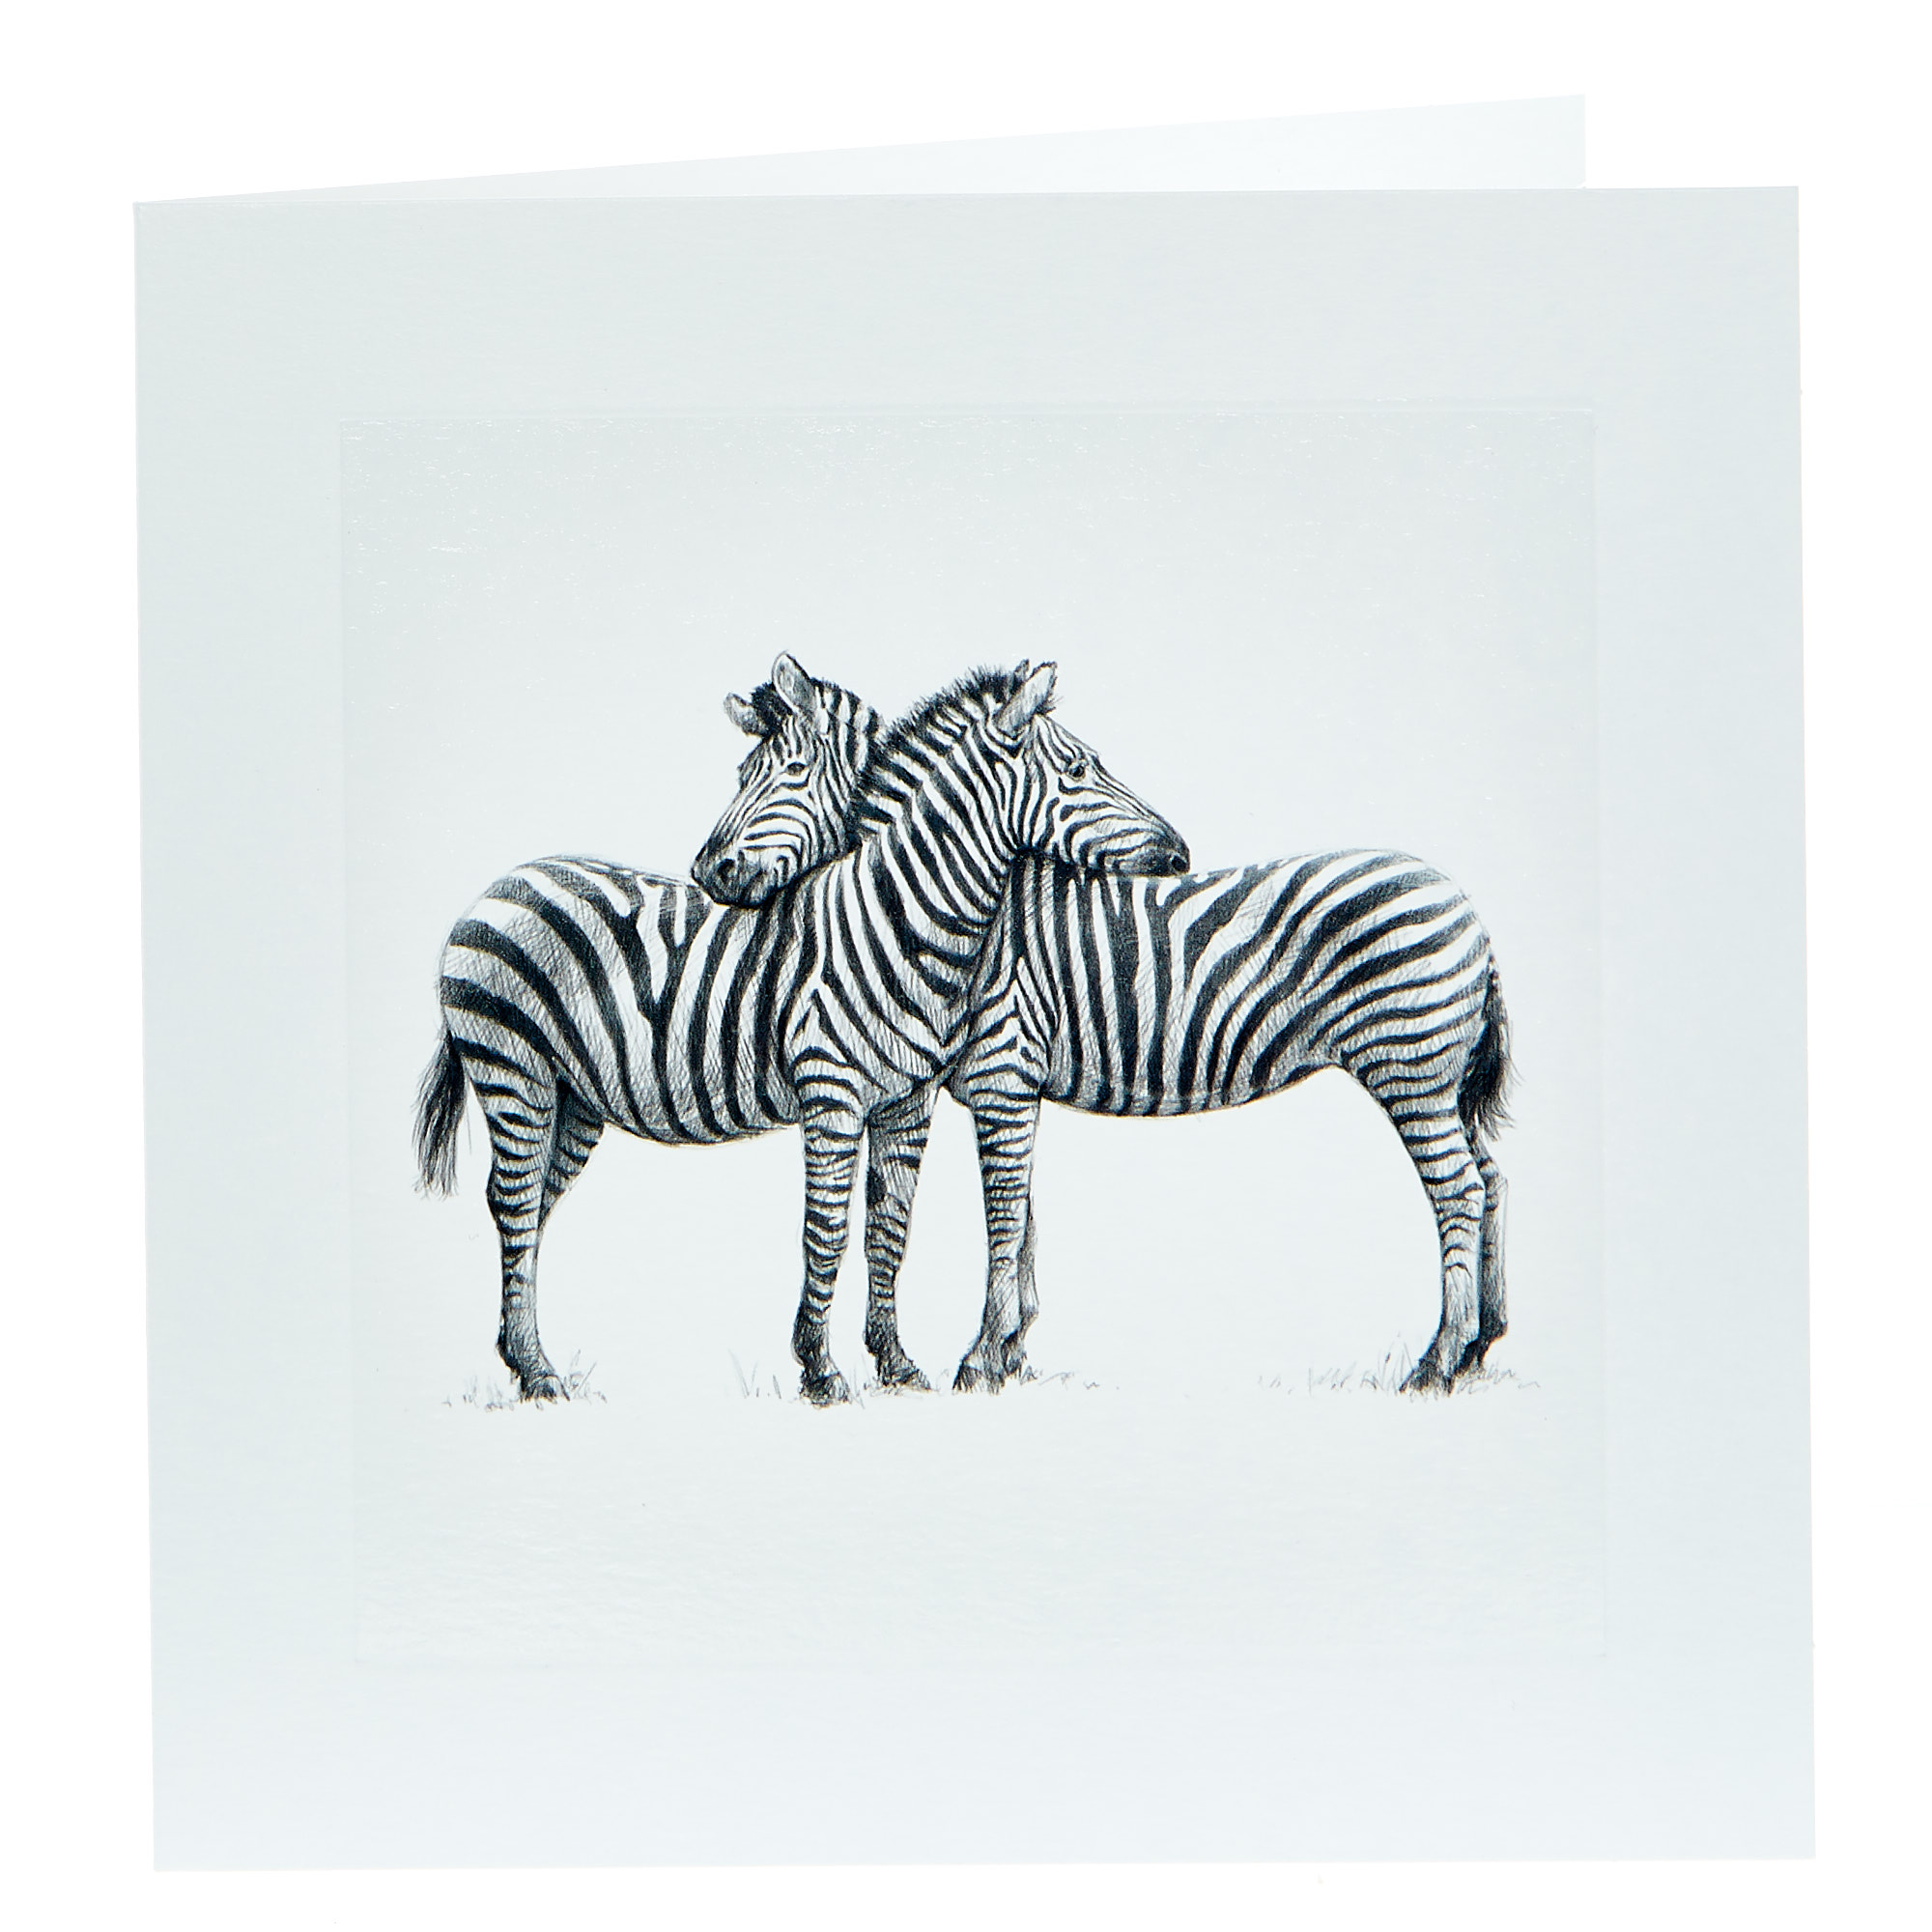 Any Occasion Card - Zebra Couple